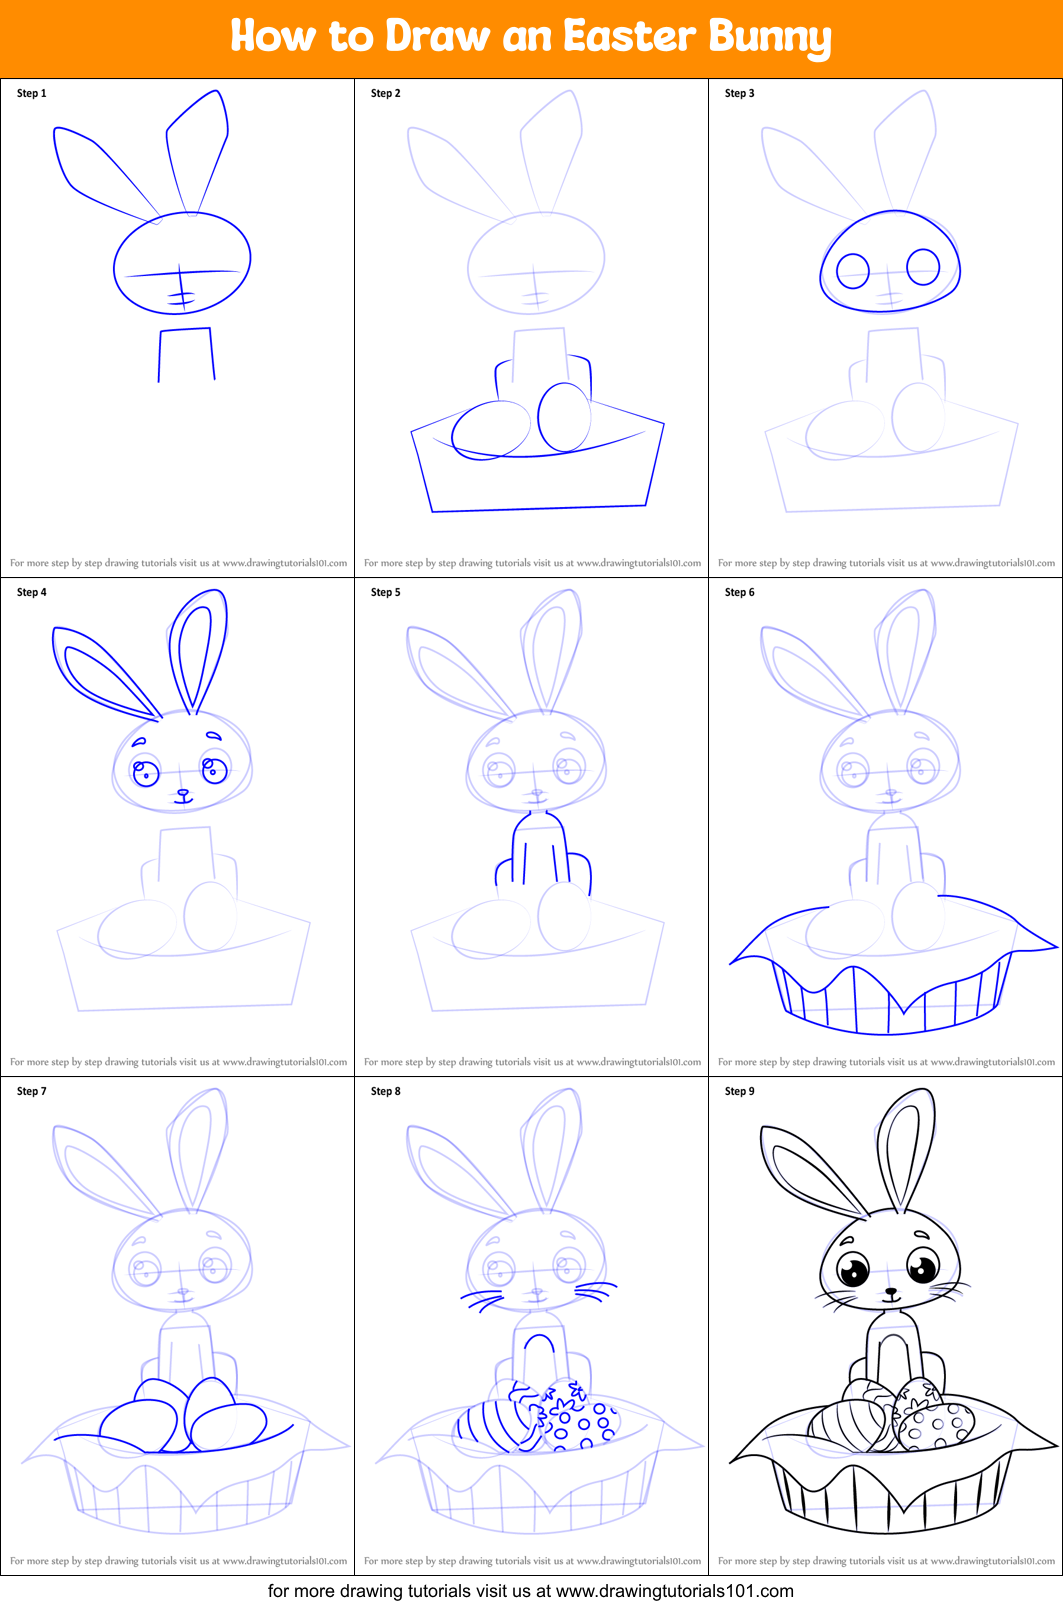 How to Draw an Easter Bunny (Easter) Step by Step